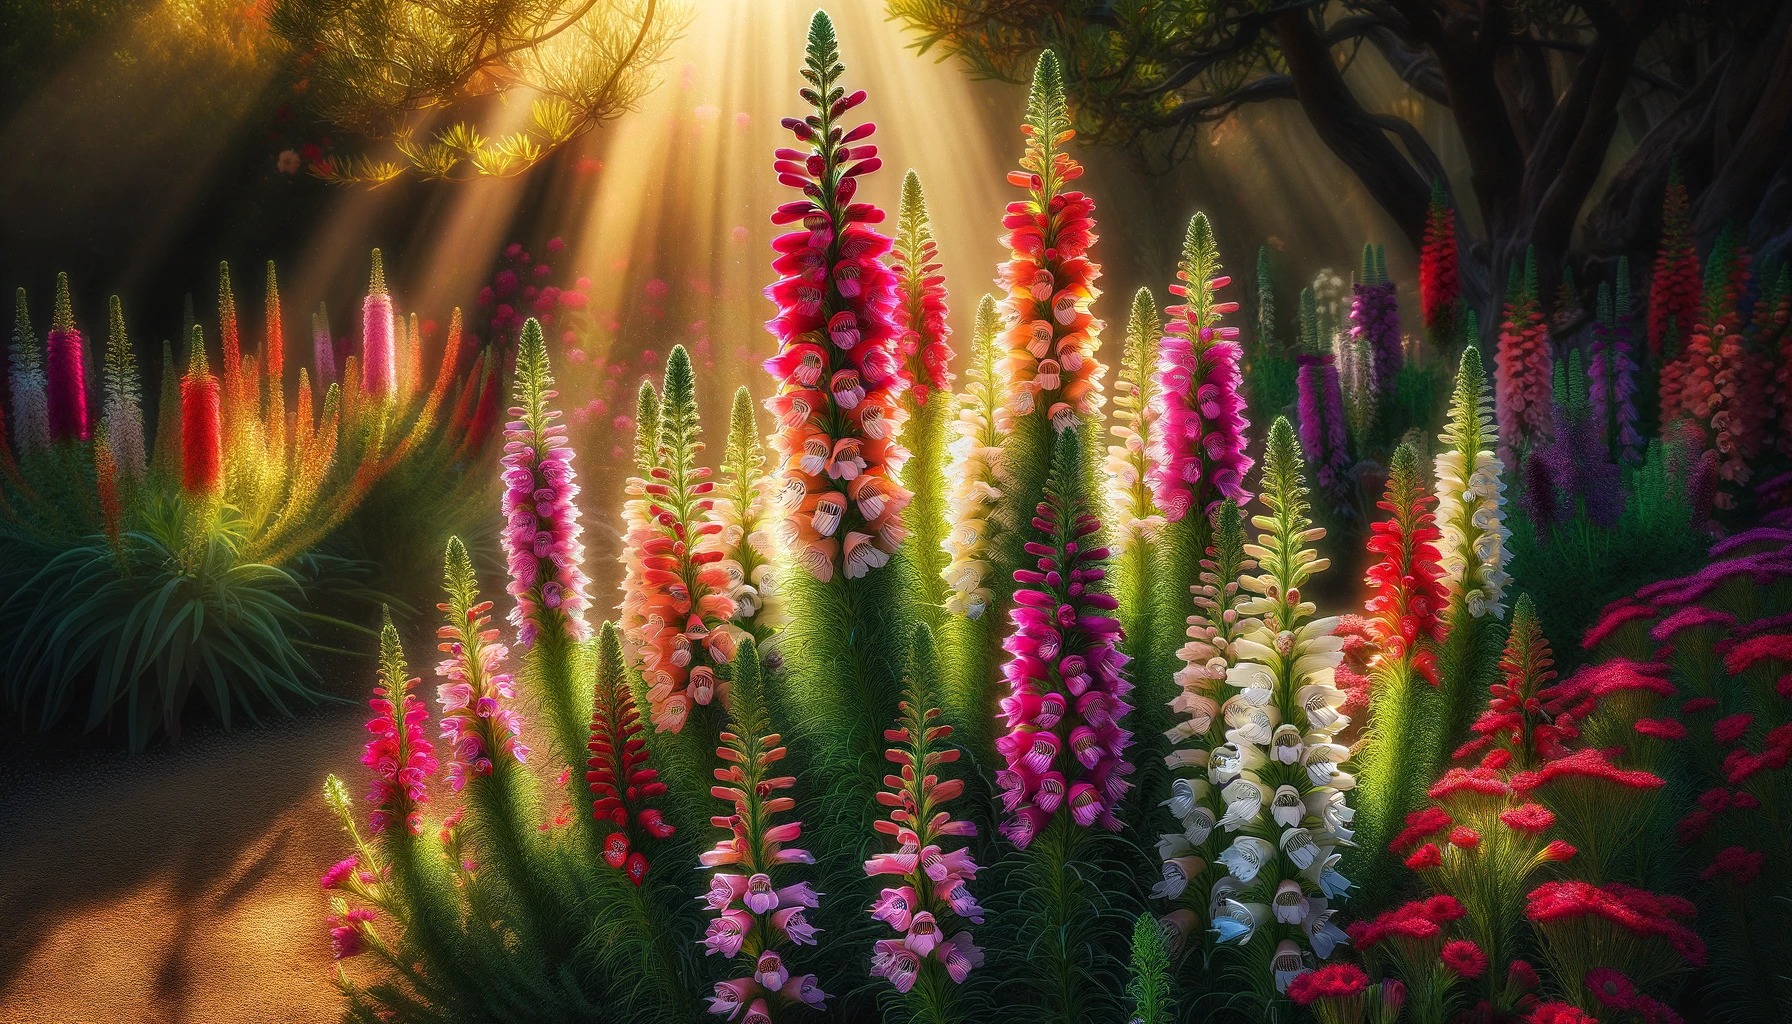 Sunlight streaming on vibrant multicolored lupine flowers.